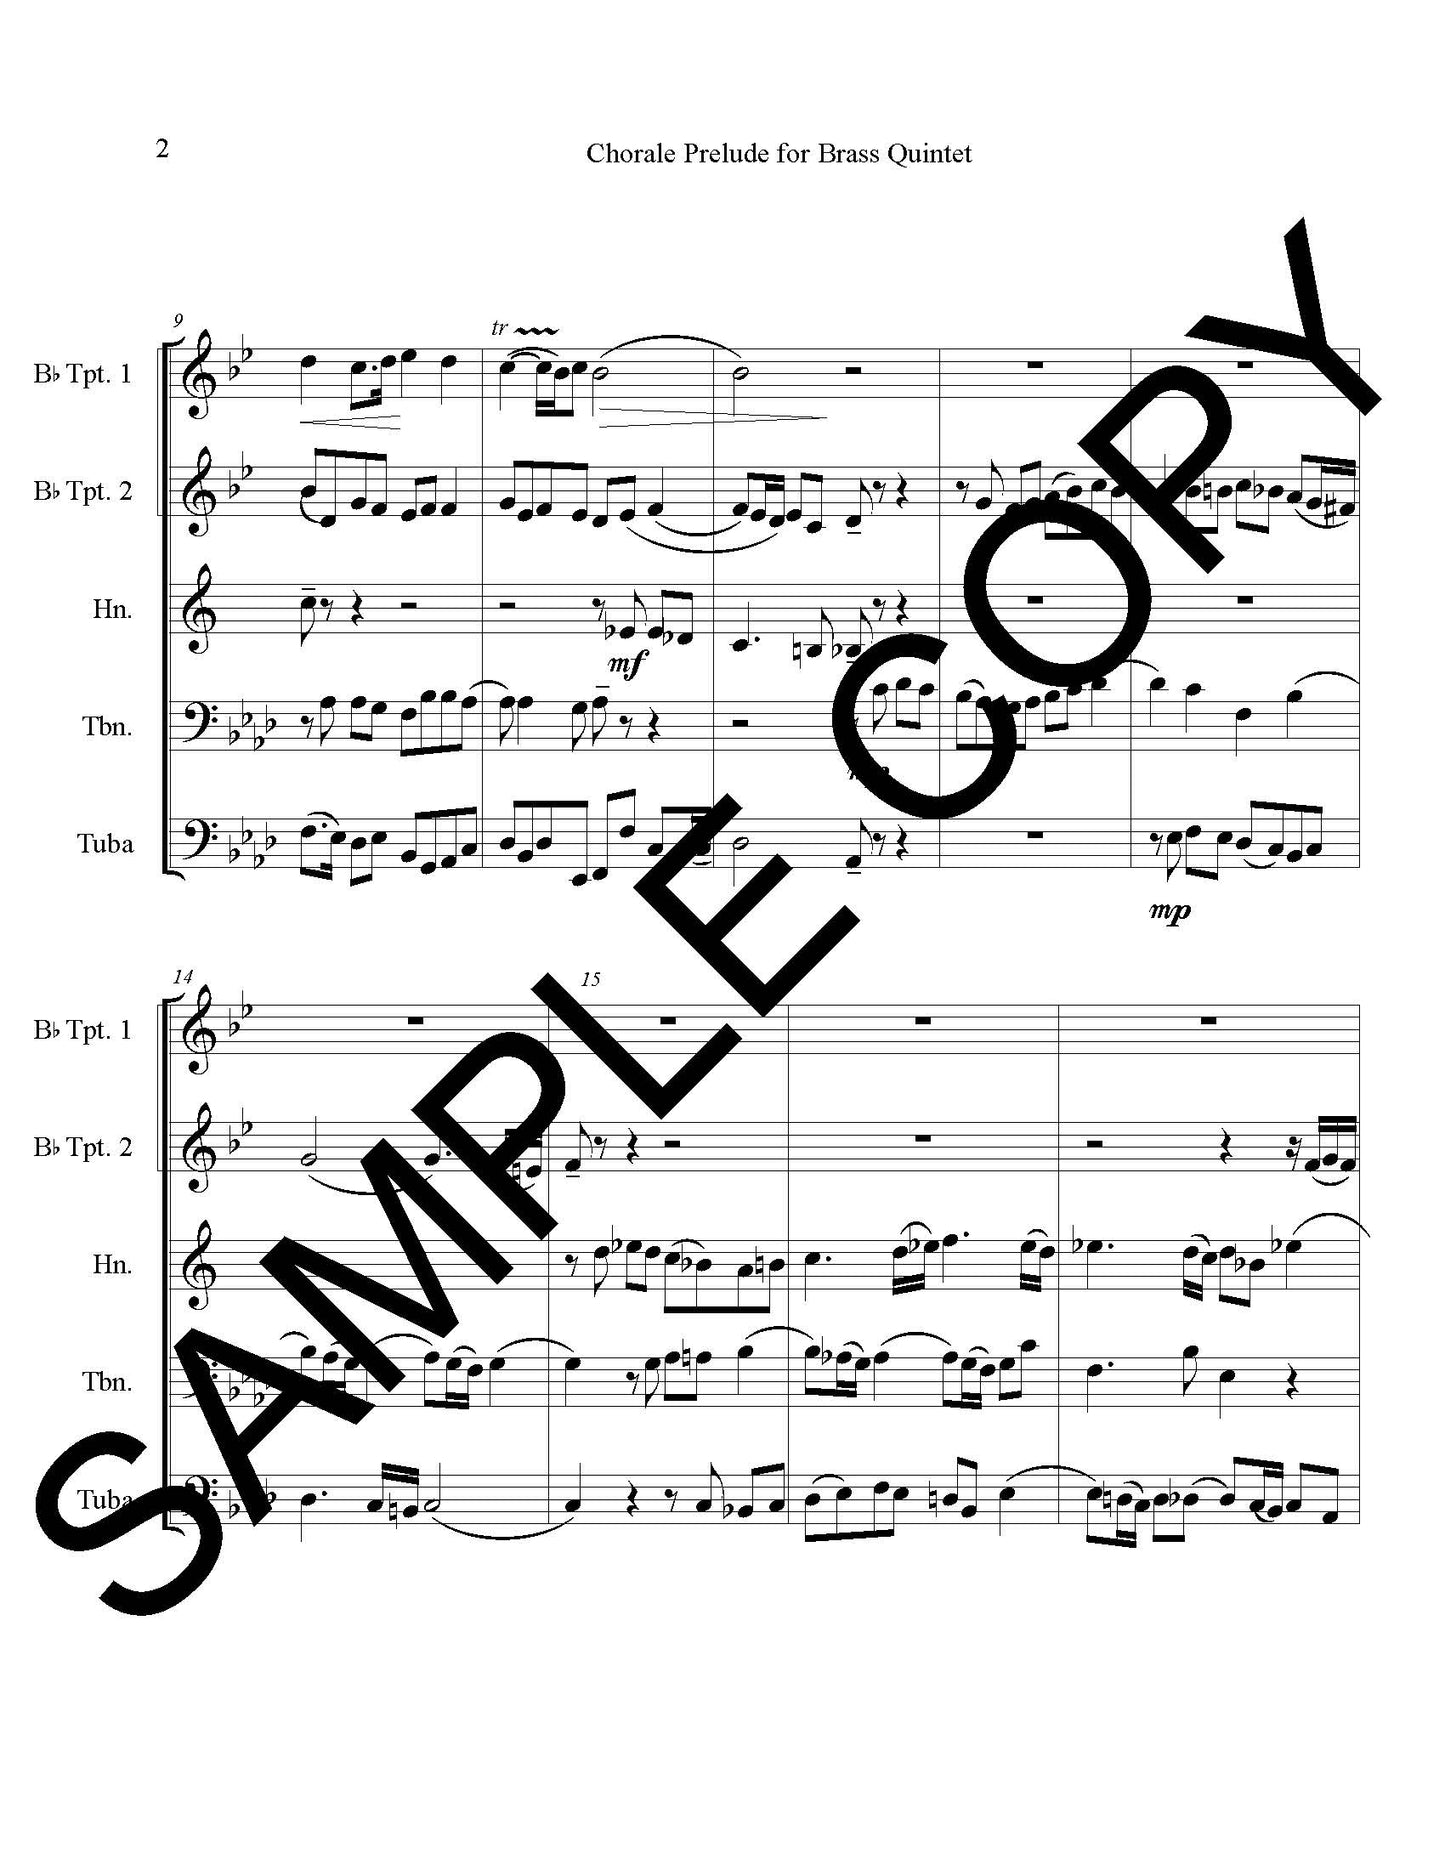 Chorale Prelude for Brass Quintet